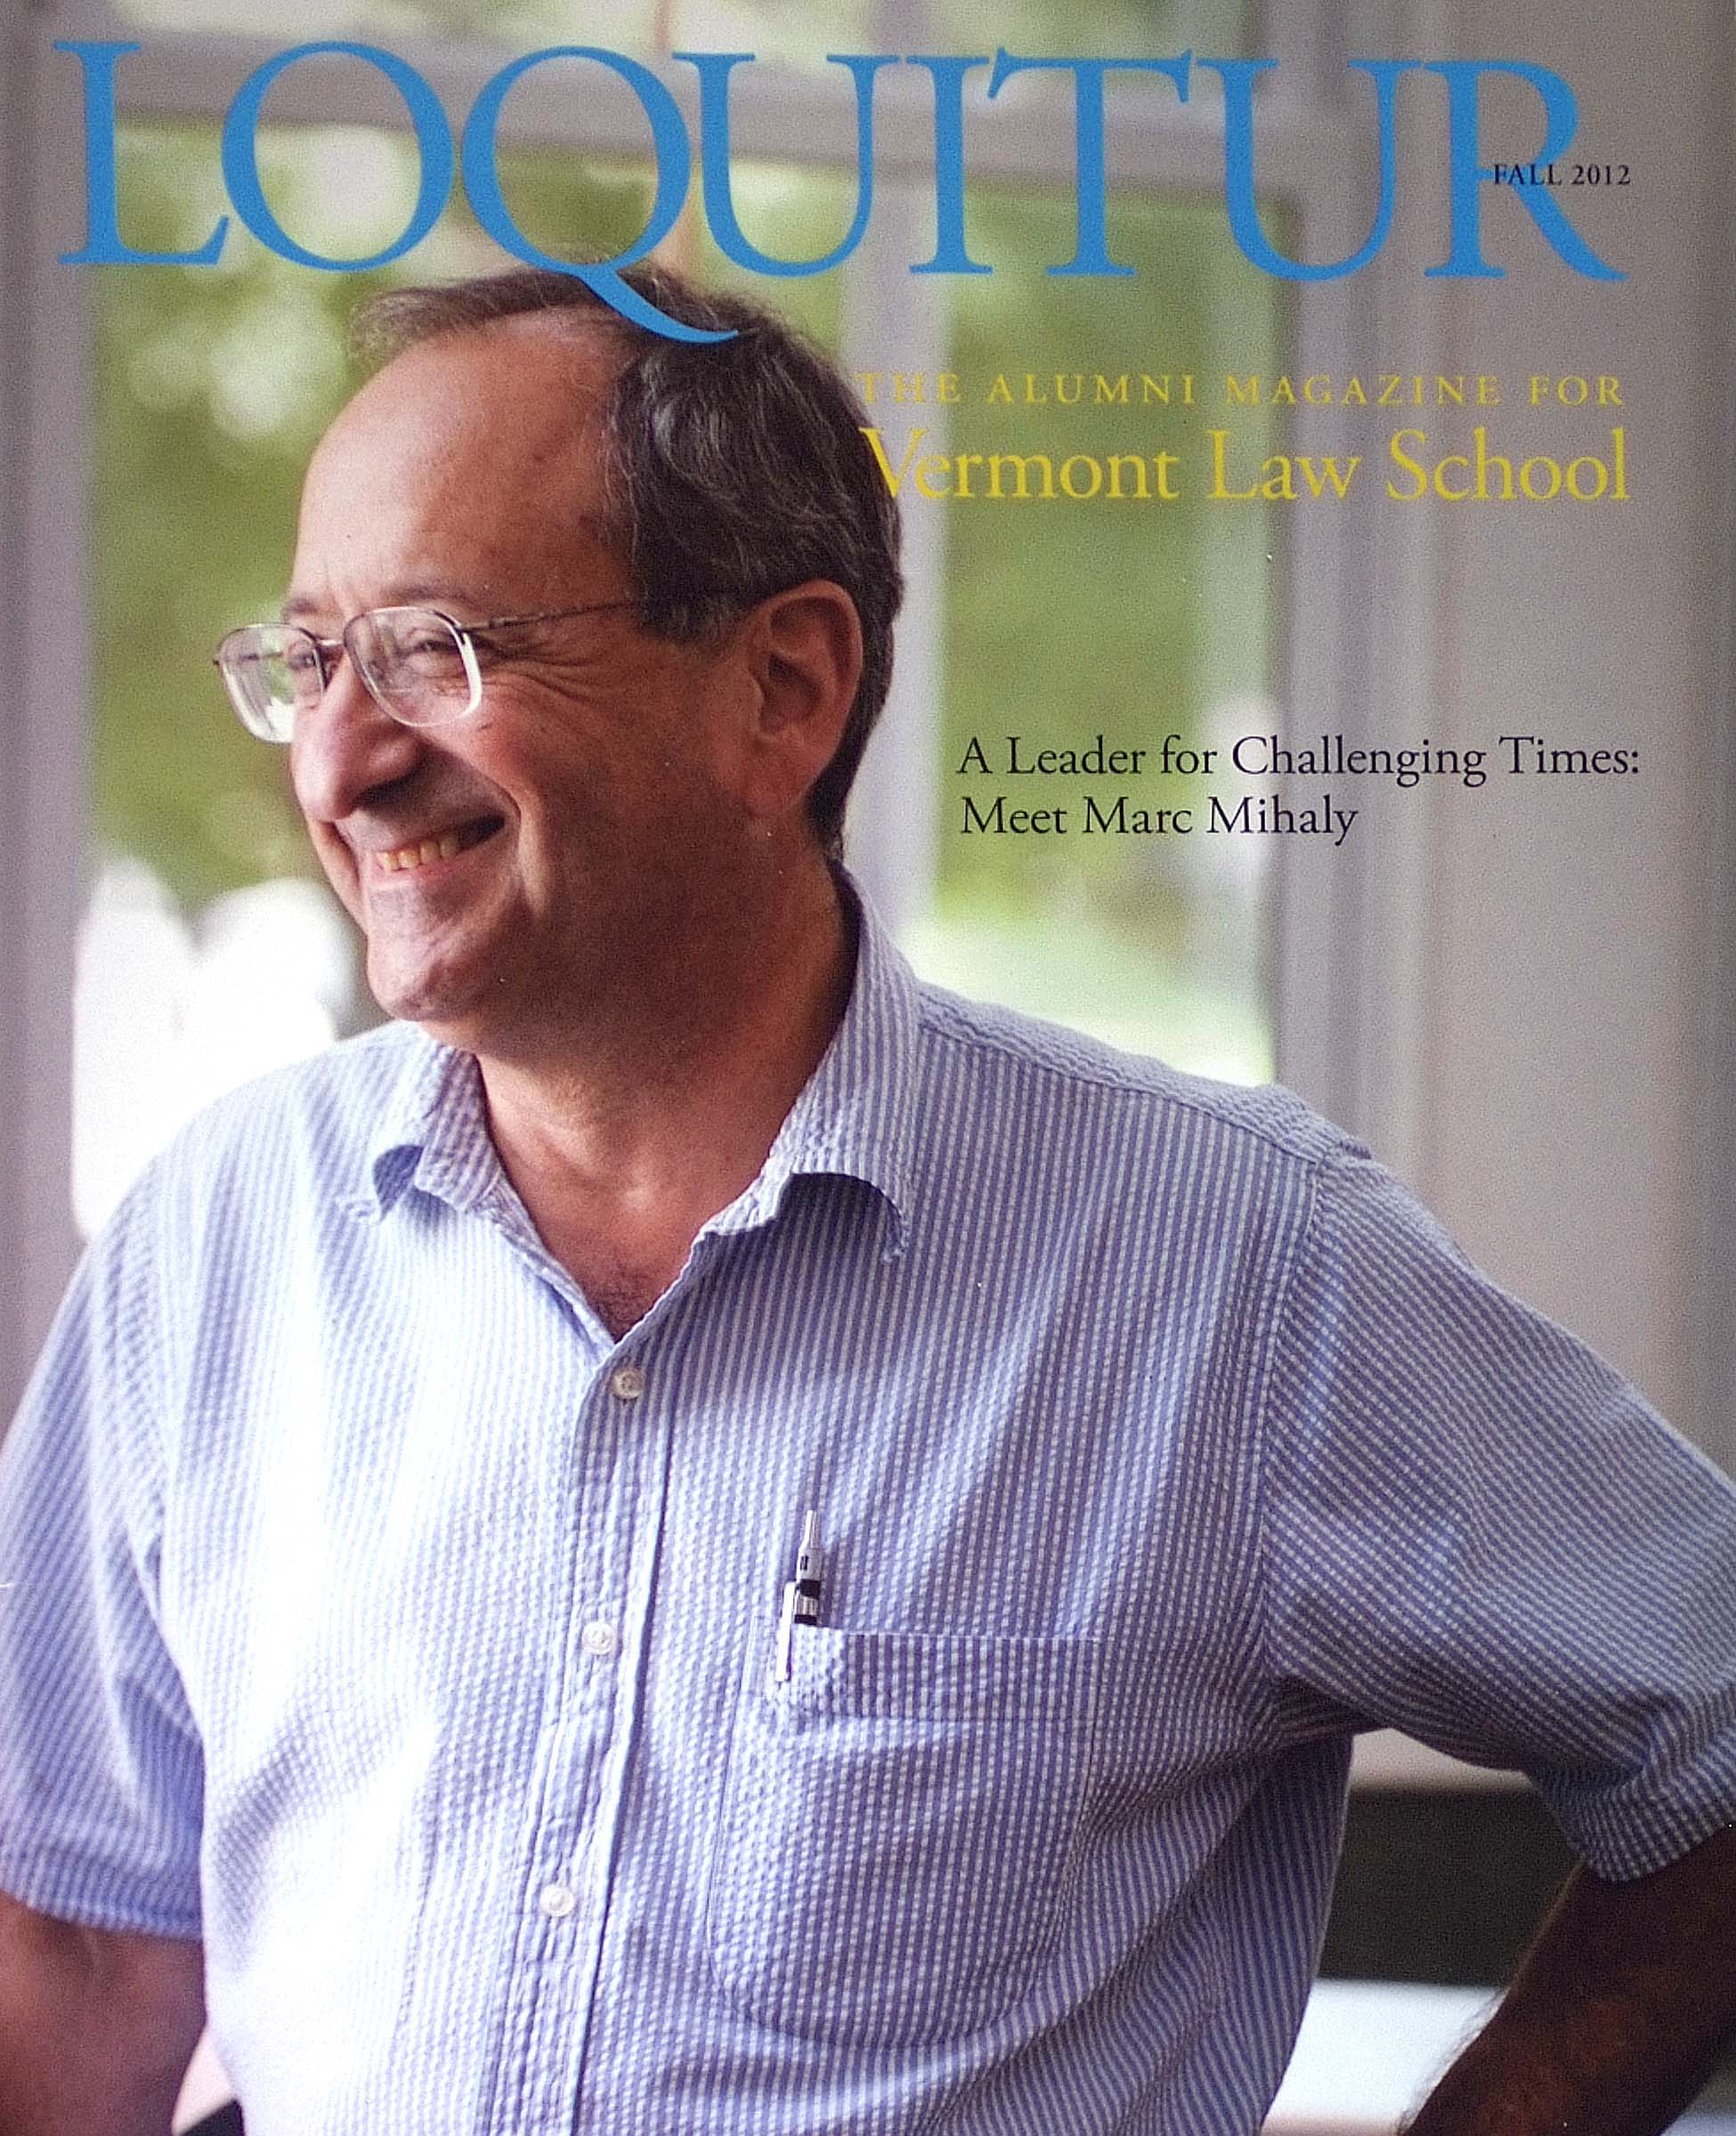 LoquitorSpring2013Cover.jpg